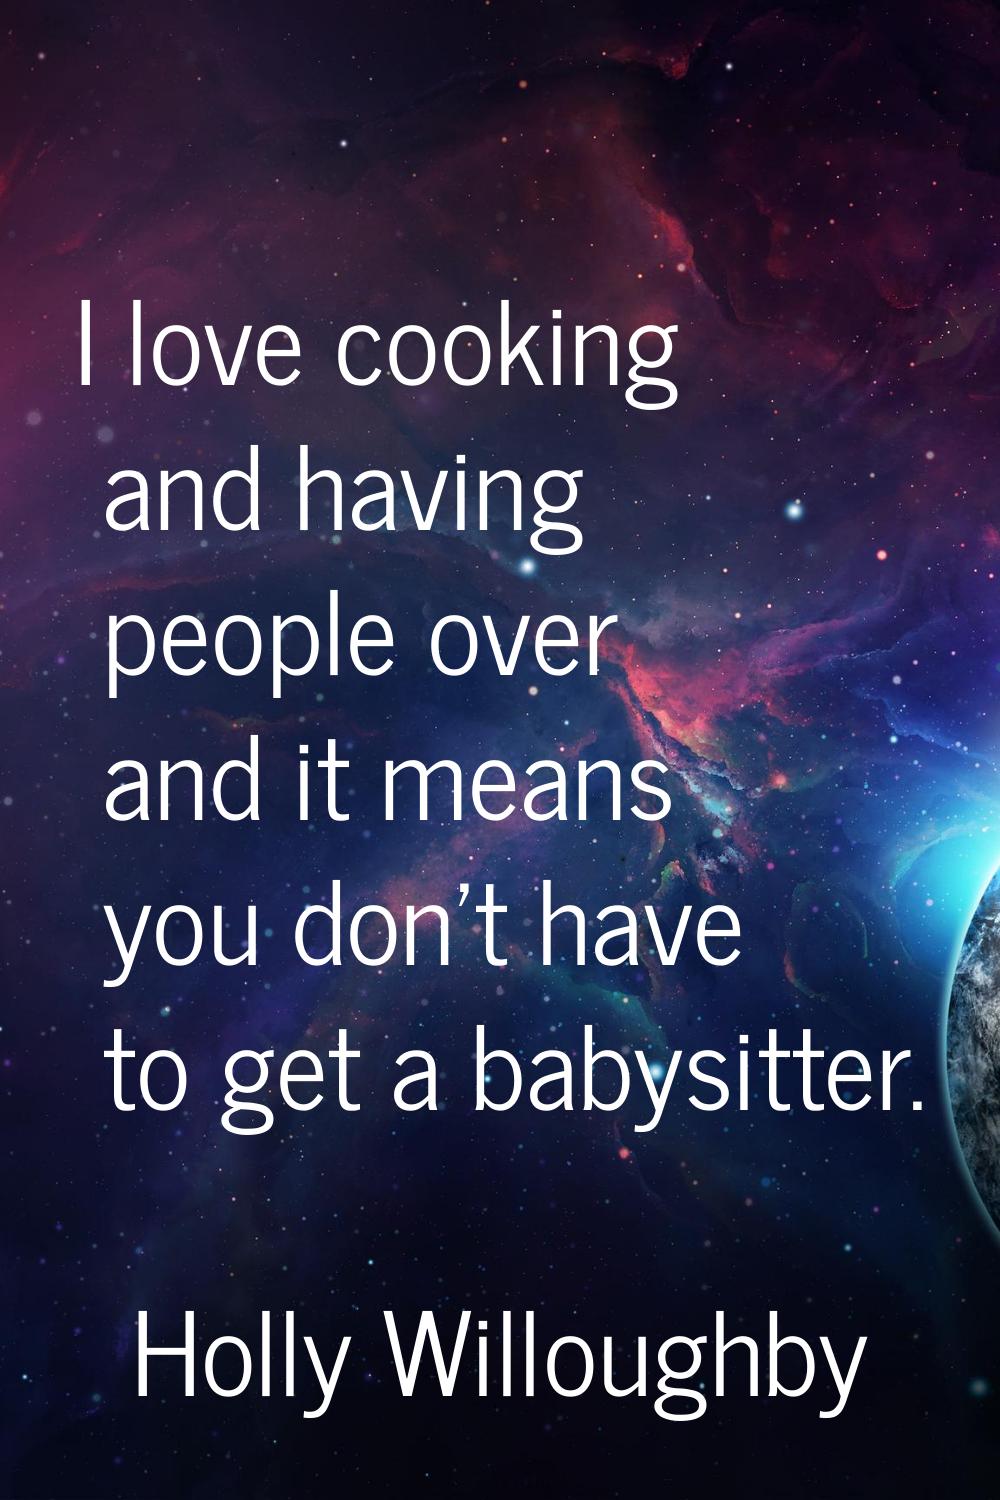 I love cooking and having people over and it means you don't have to get a babysitter.